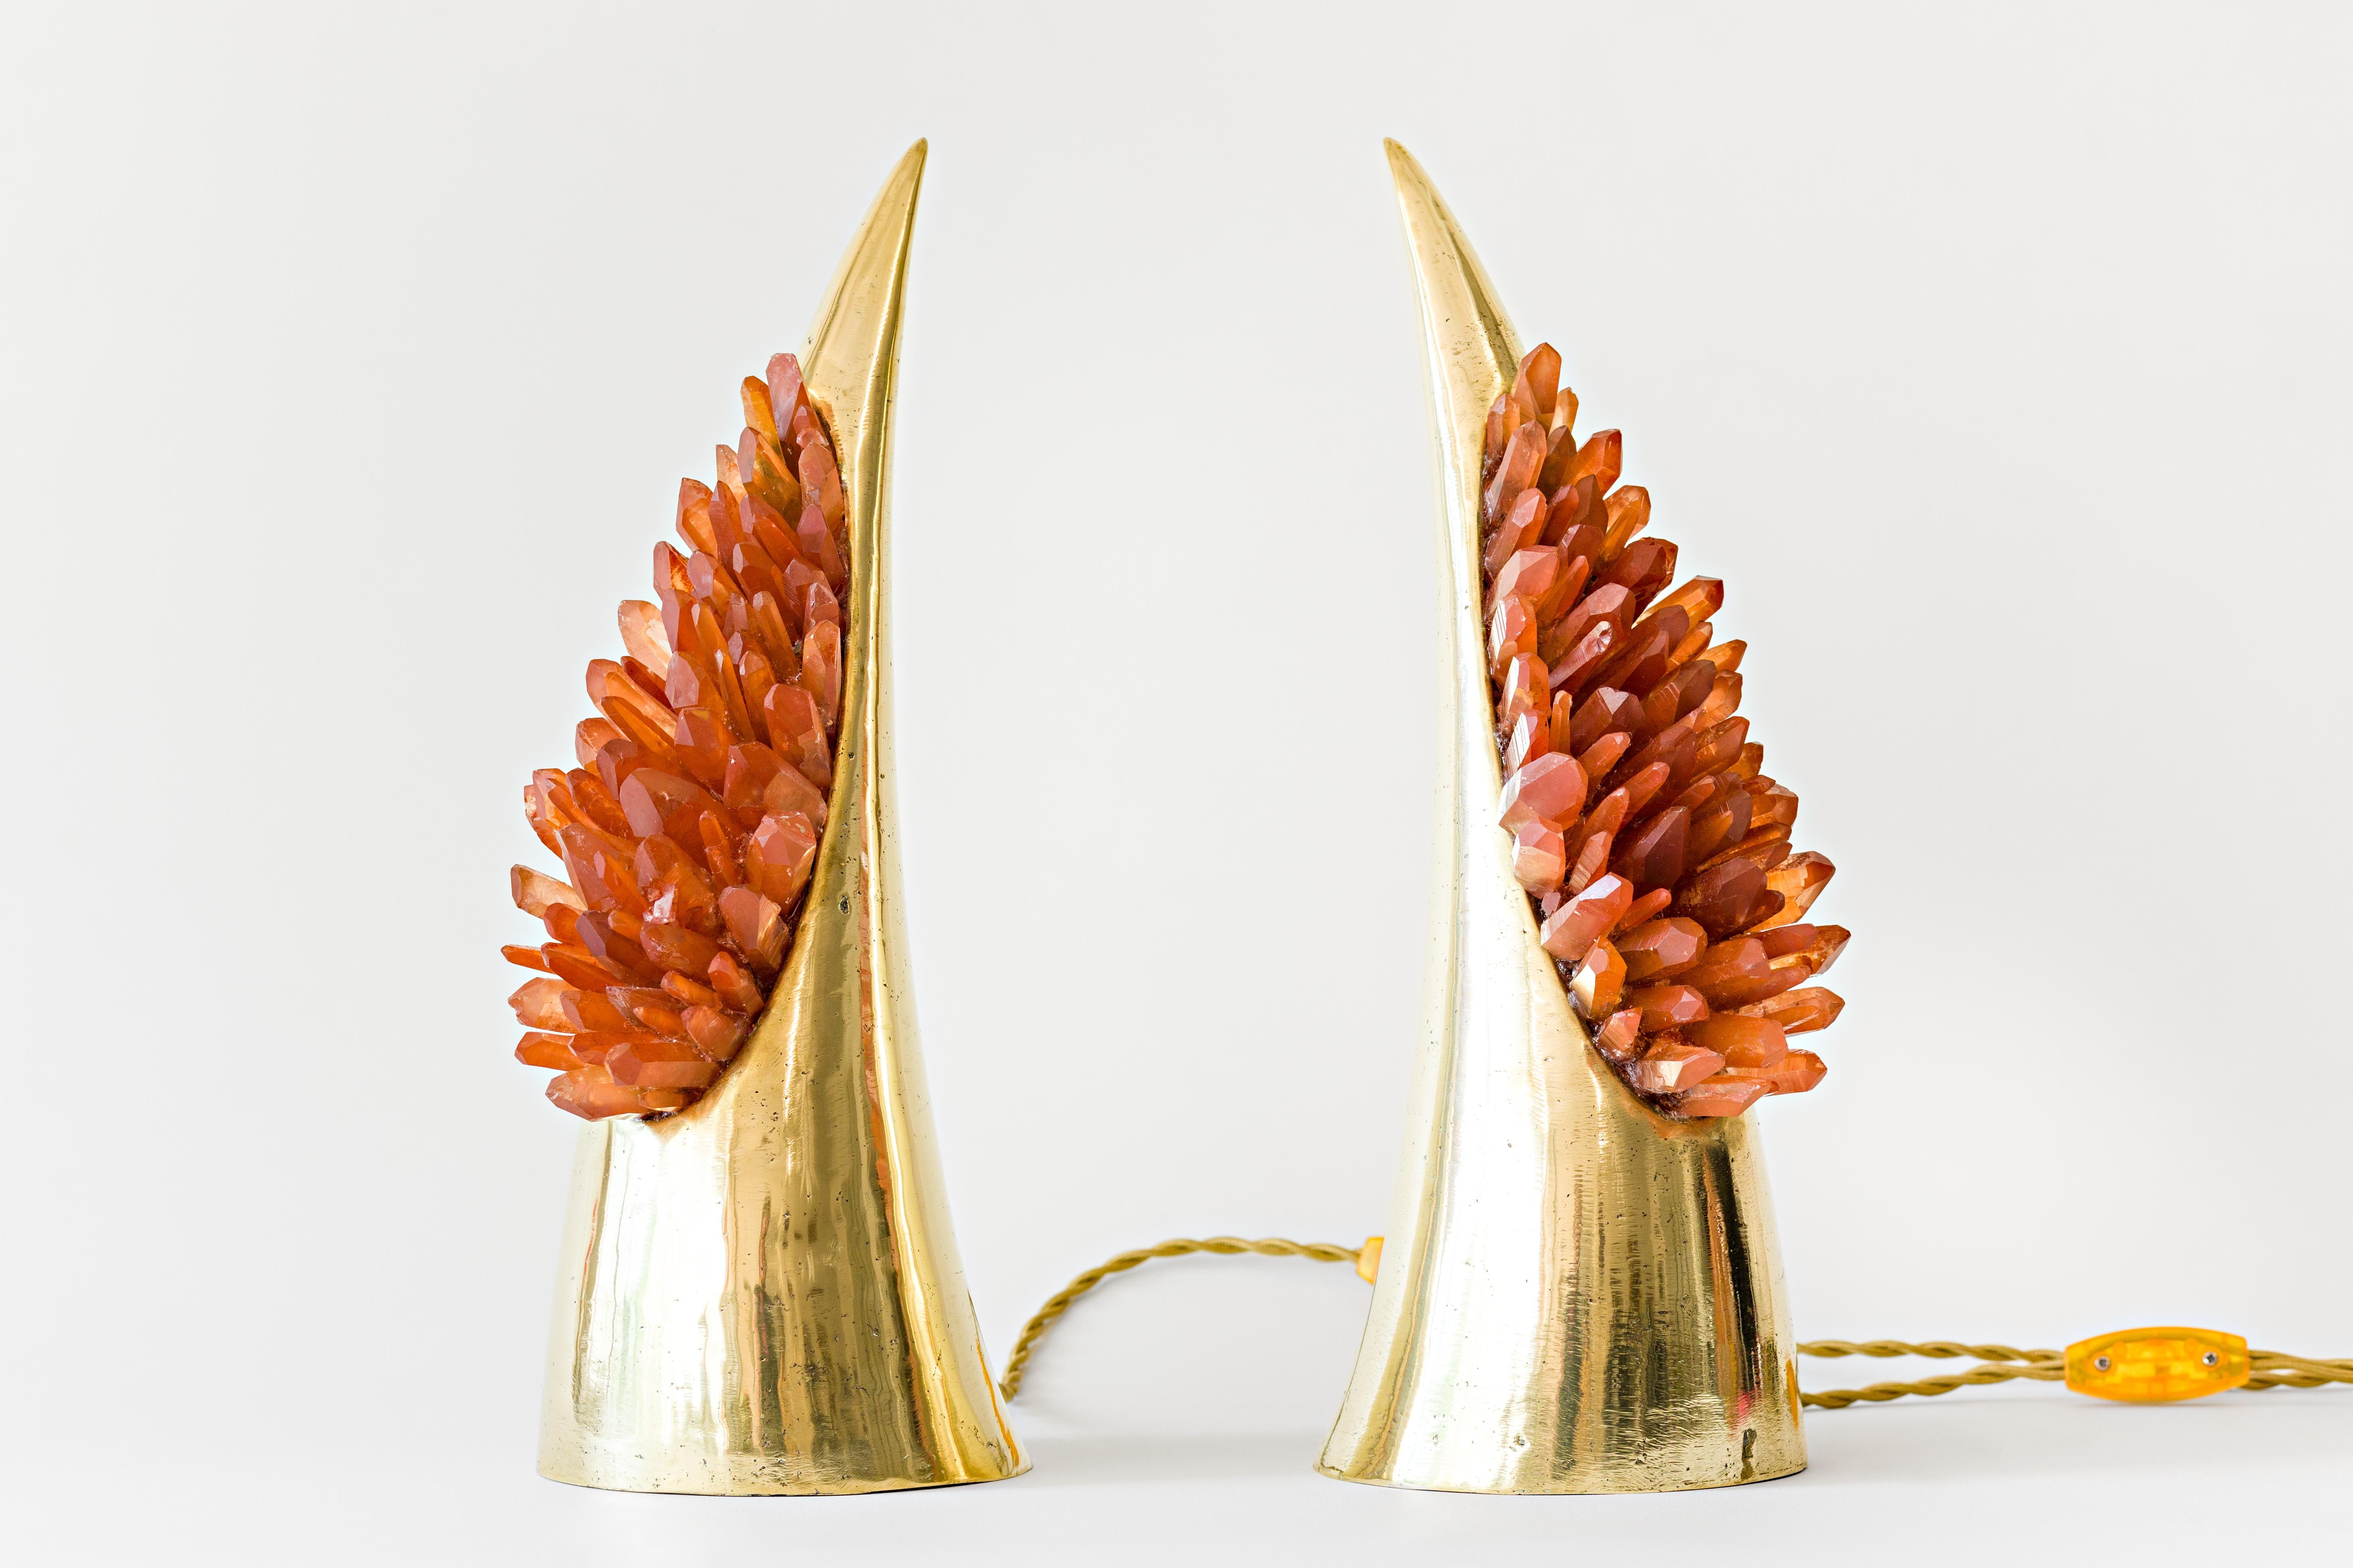 Set of Red Aurea table lamp Demian Quincke
Dimensions: 16 Ø x H 40 cm
Materials: Casted Brass, unique red natural quartz points.

Like an eruption of red strength blooming from an organic form. The form has some
remainder of a horn or a